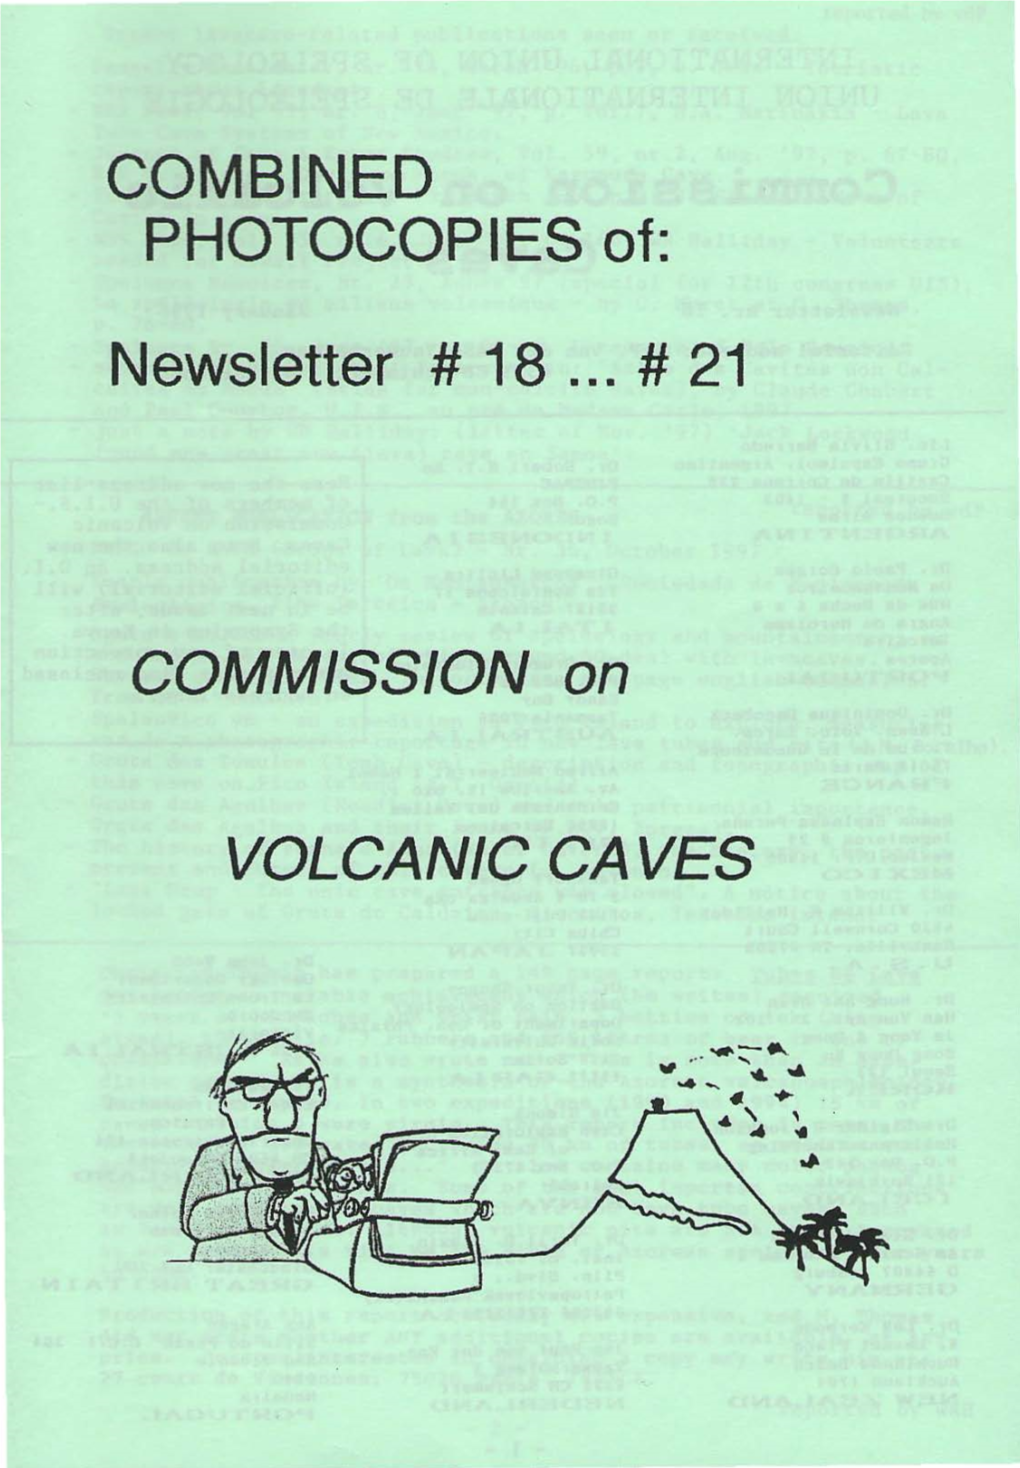 Newsletter # 18 ... # 21 COMMISSION on VOLCANIC CAVES